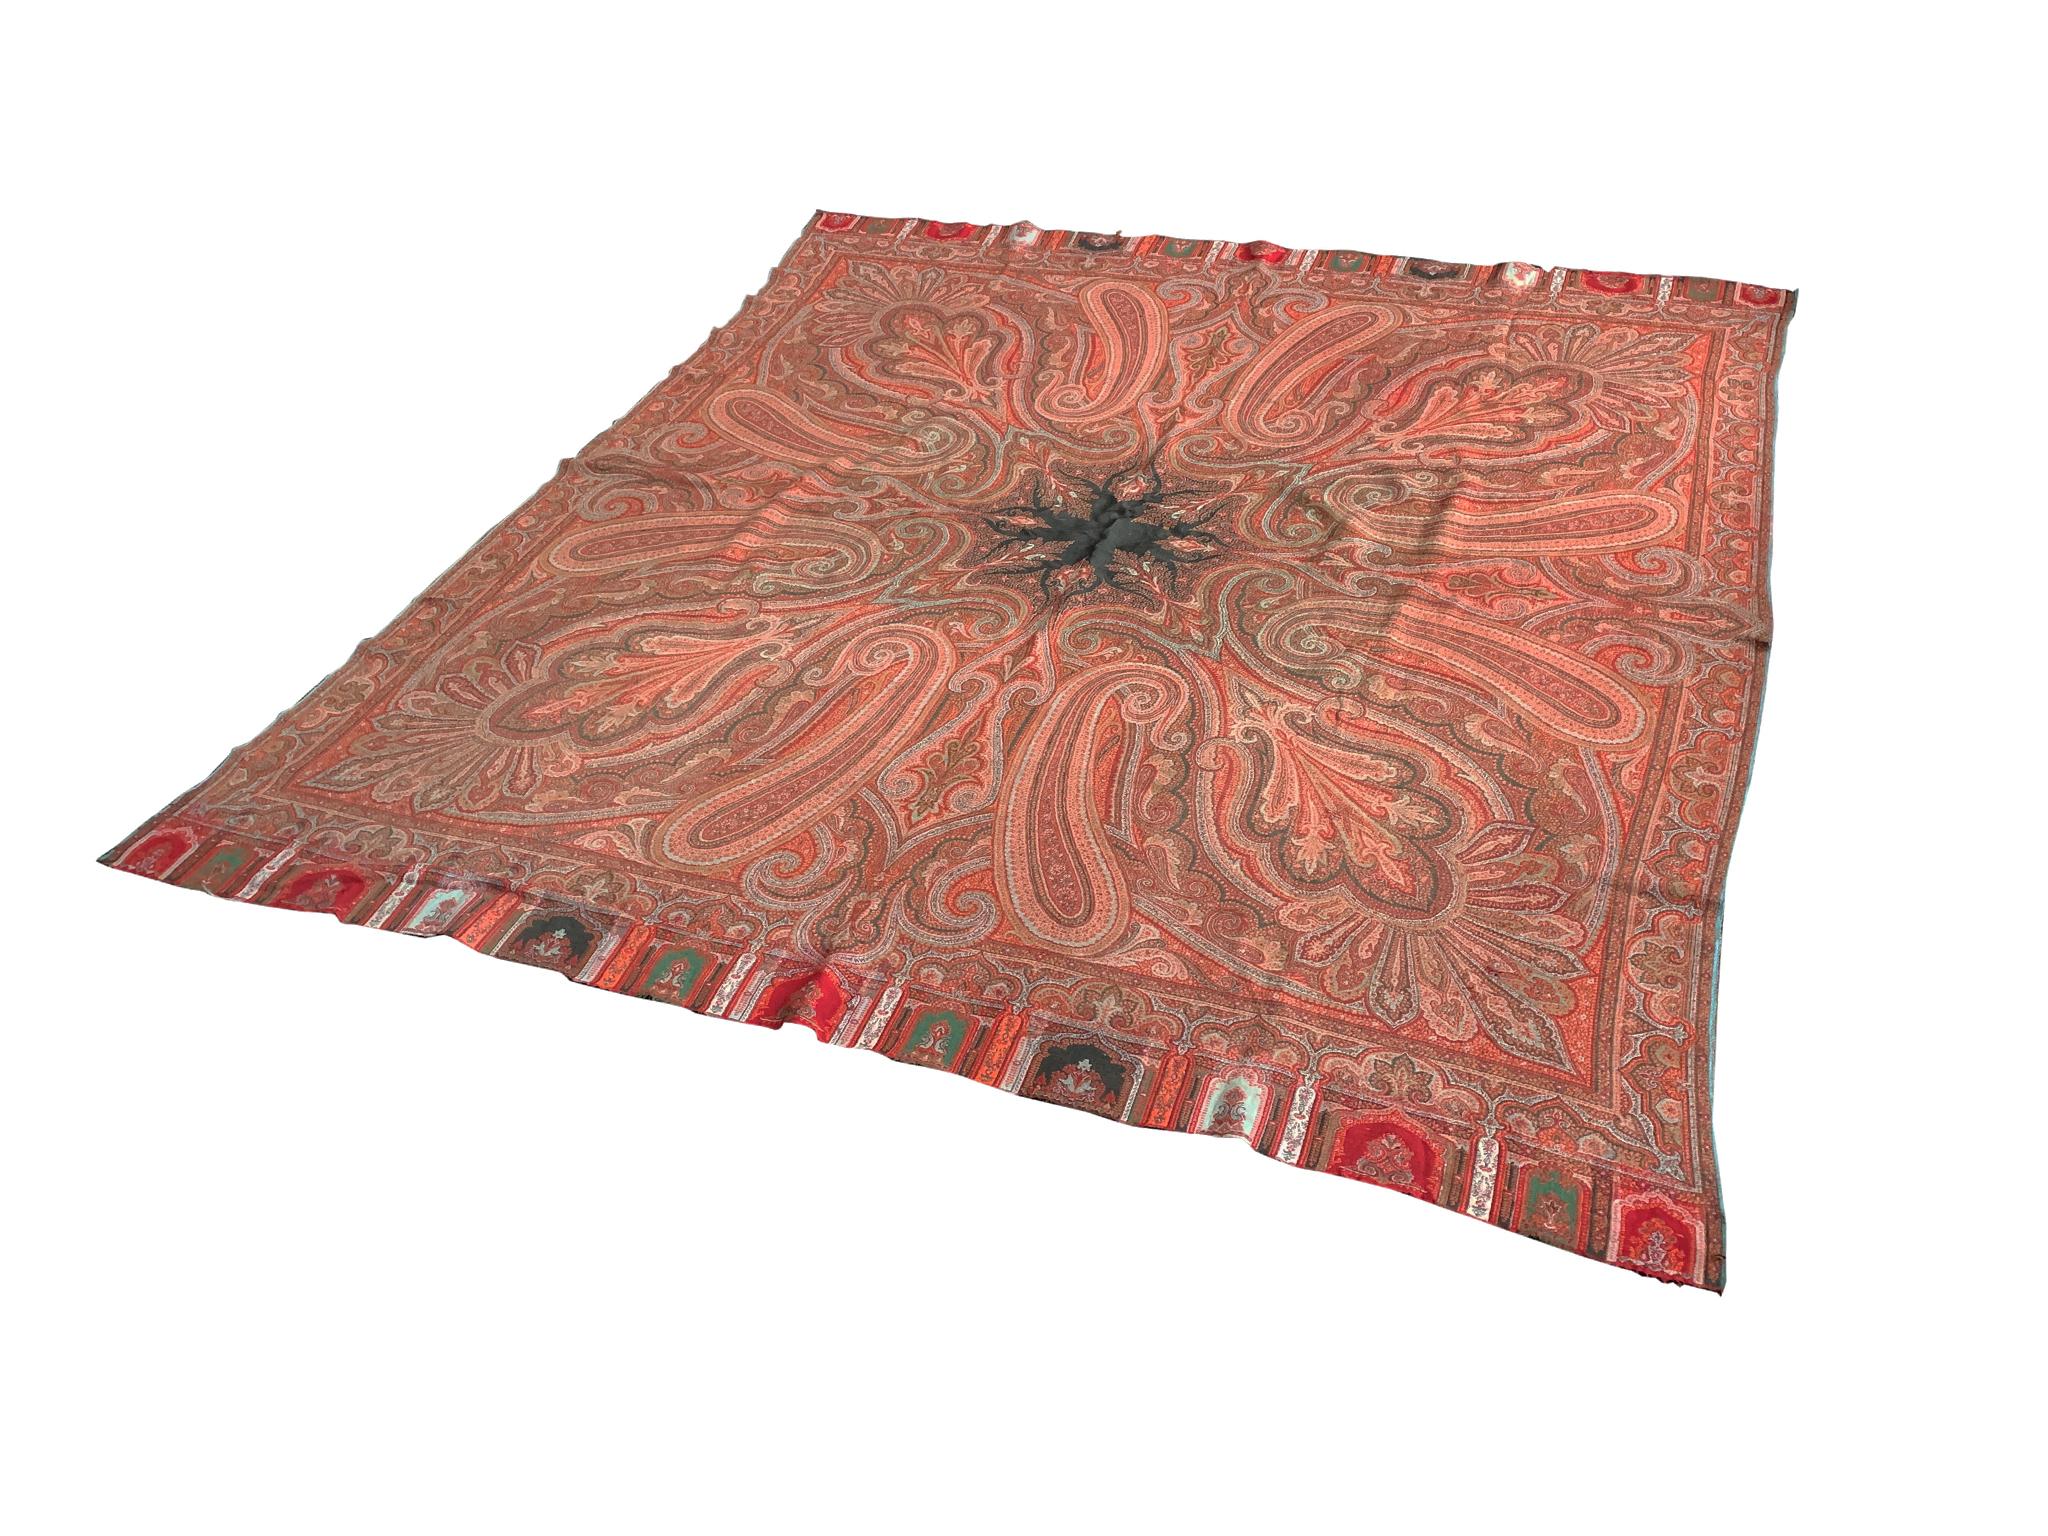 A decorative, vintage throw with a bold paisley design. The palette is a rich mix of red, orange, and pink with accents of green, white, and black. It's a very beautiful composition that can enliven a room with stunning pattern and